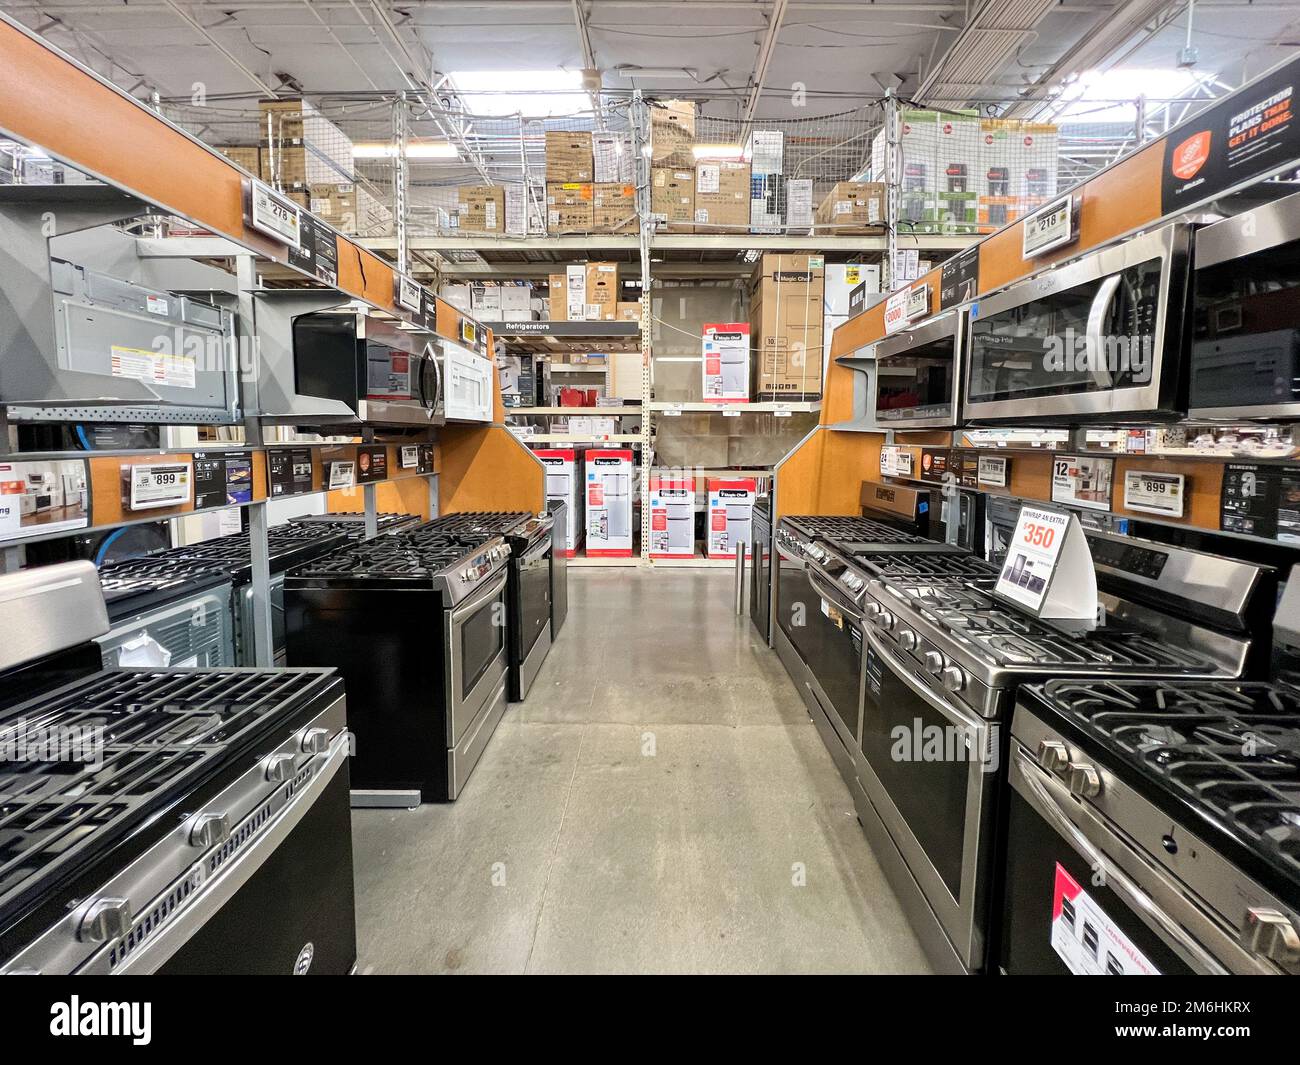 Several kitchen electronic units for sale at The Home Depot, Carmel Valley, San Diego Stock Photo